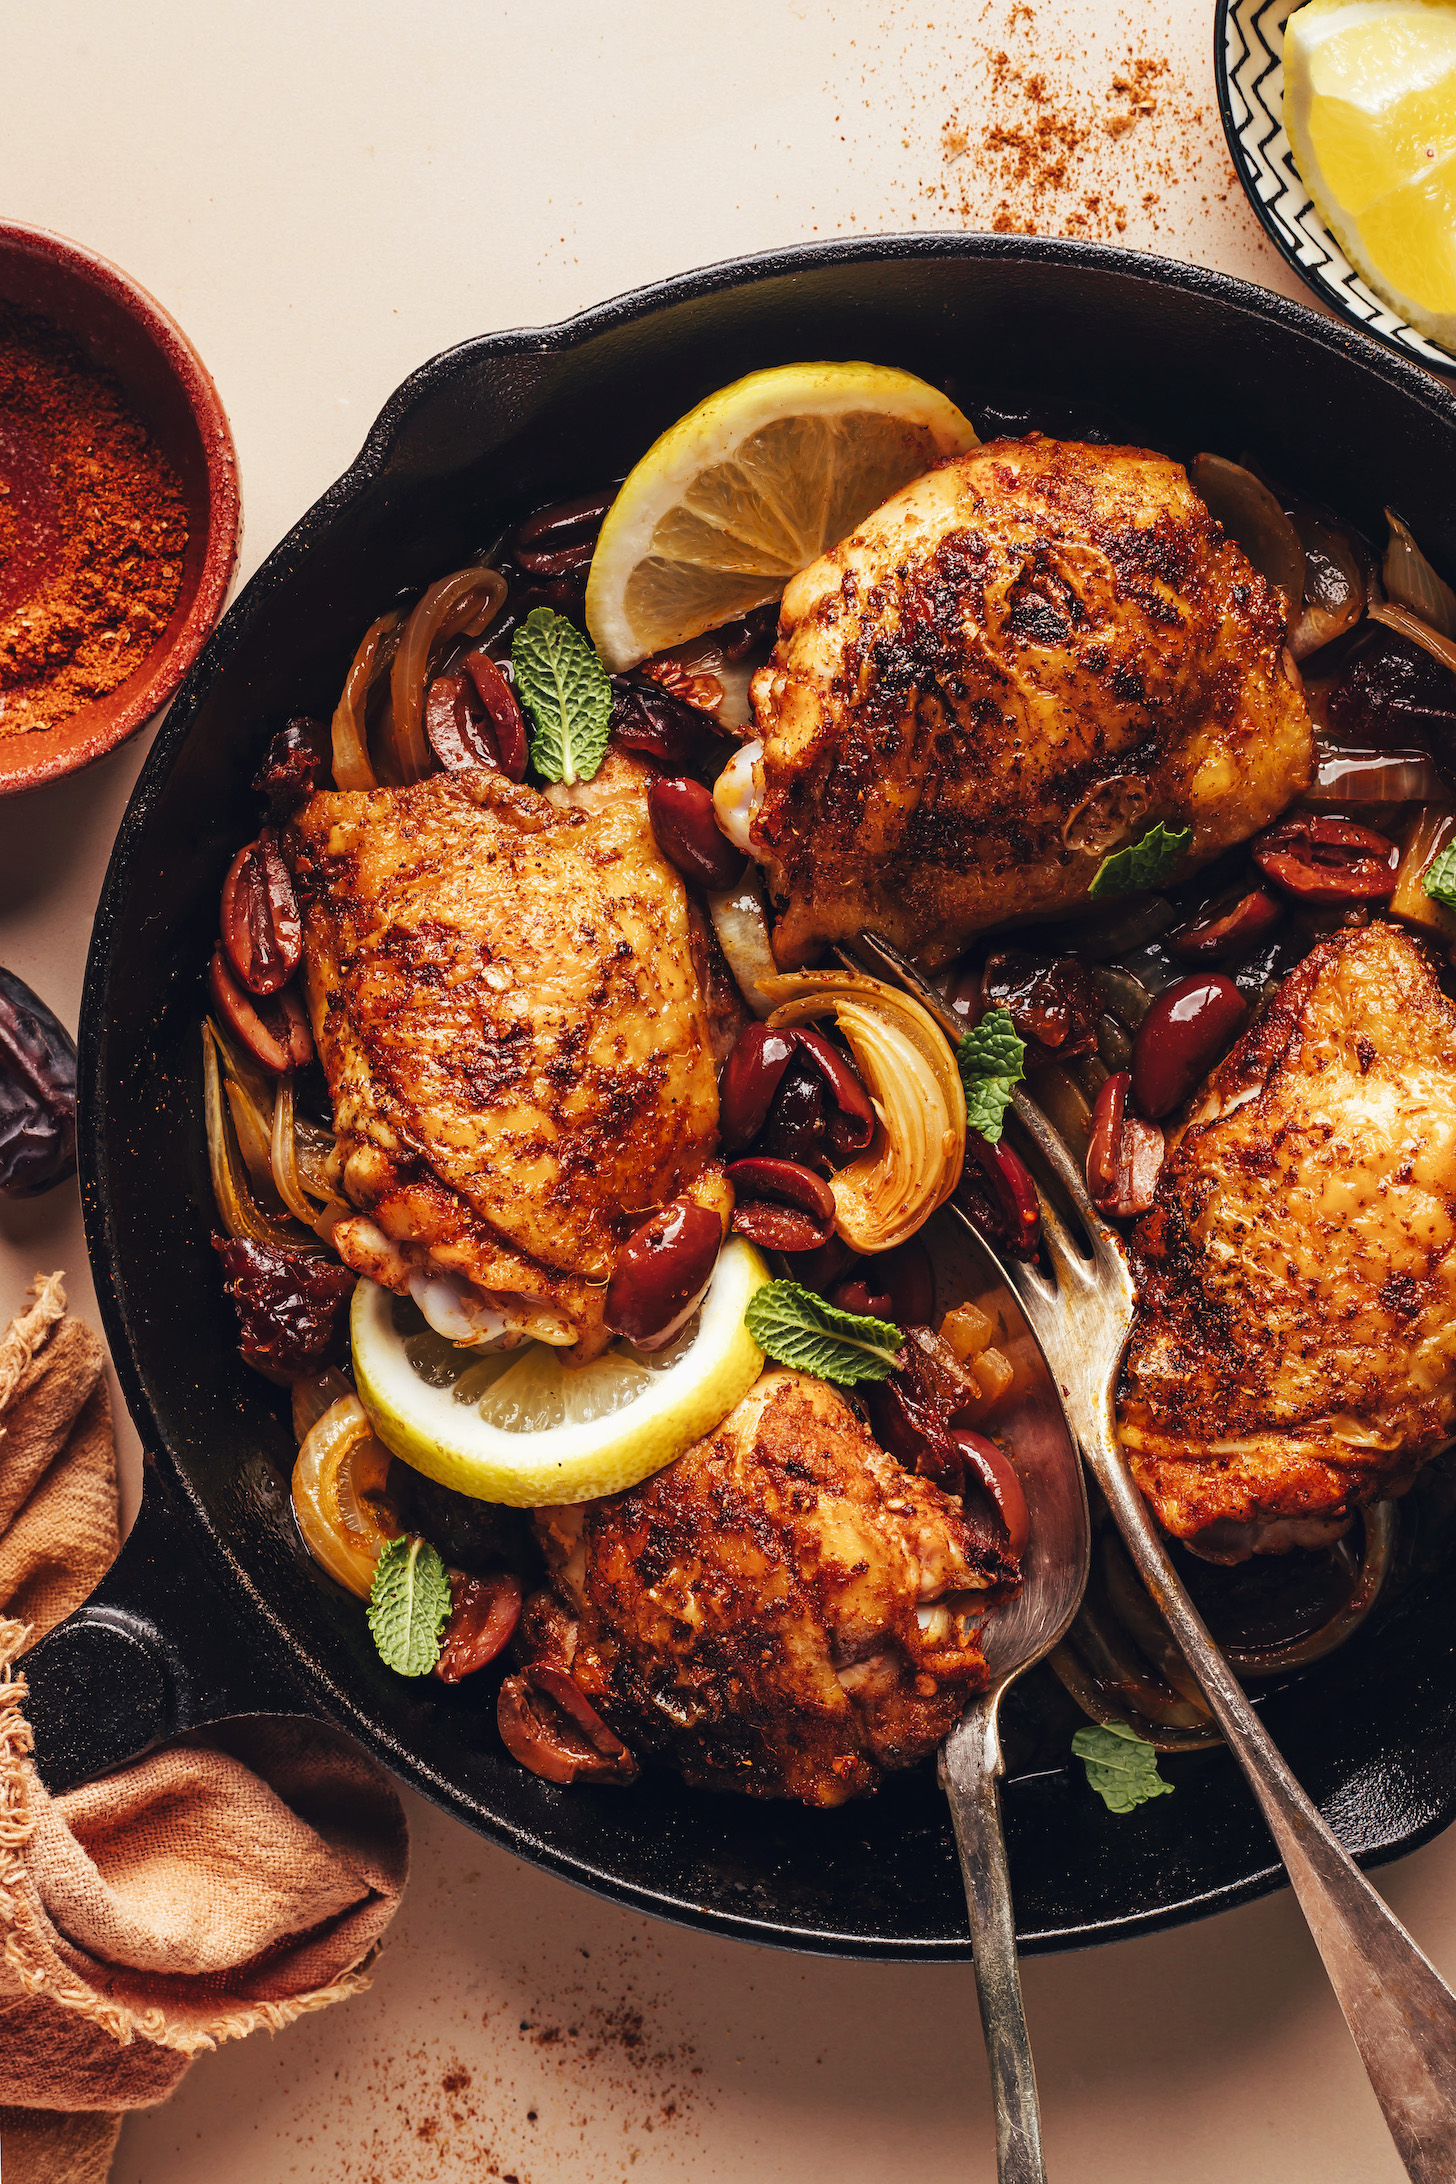 Pan of crispy baked chicken thighs surrounded by olives and caramelized onions